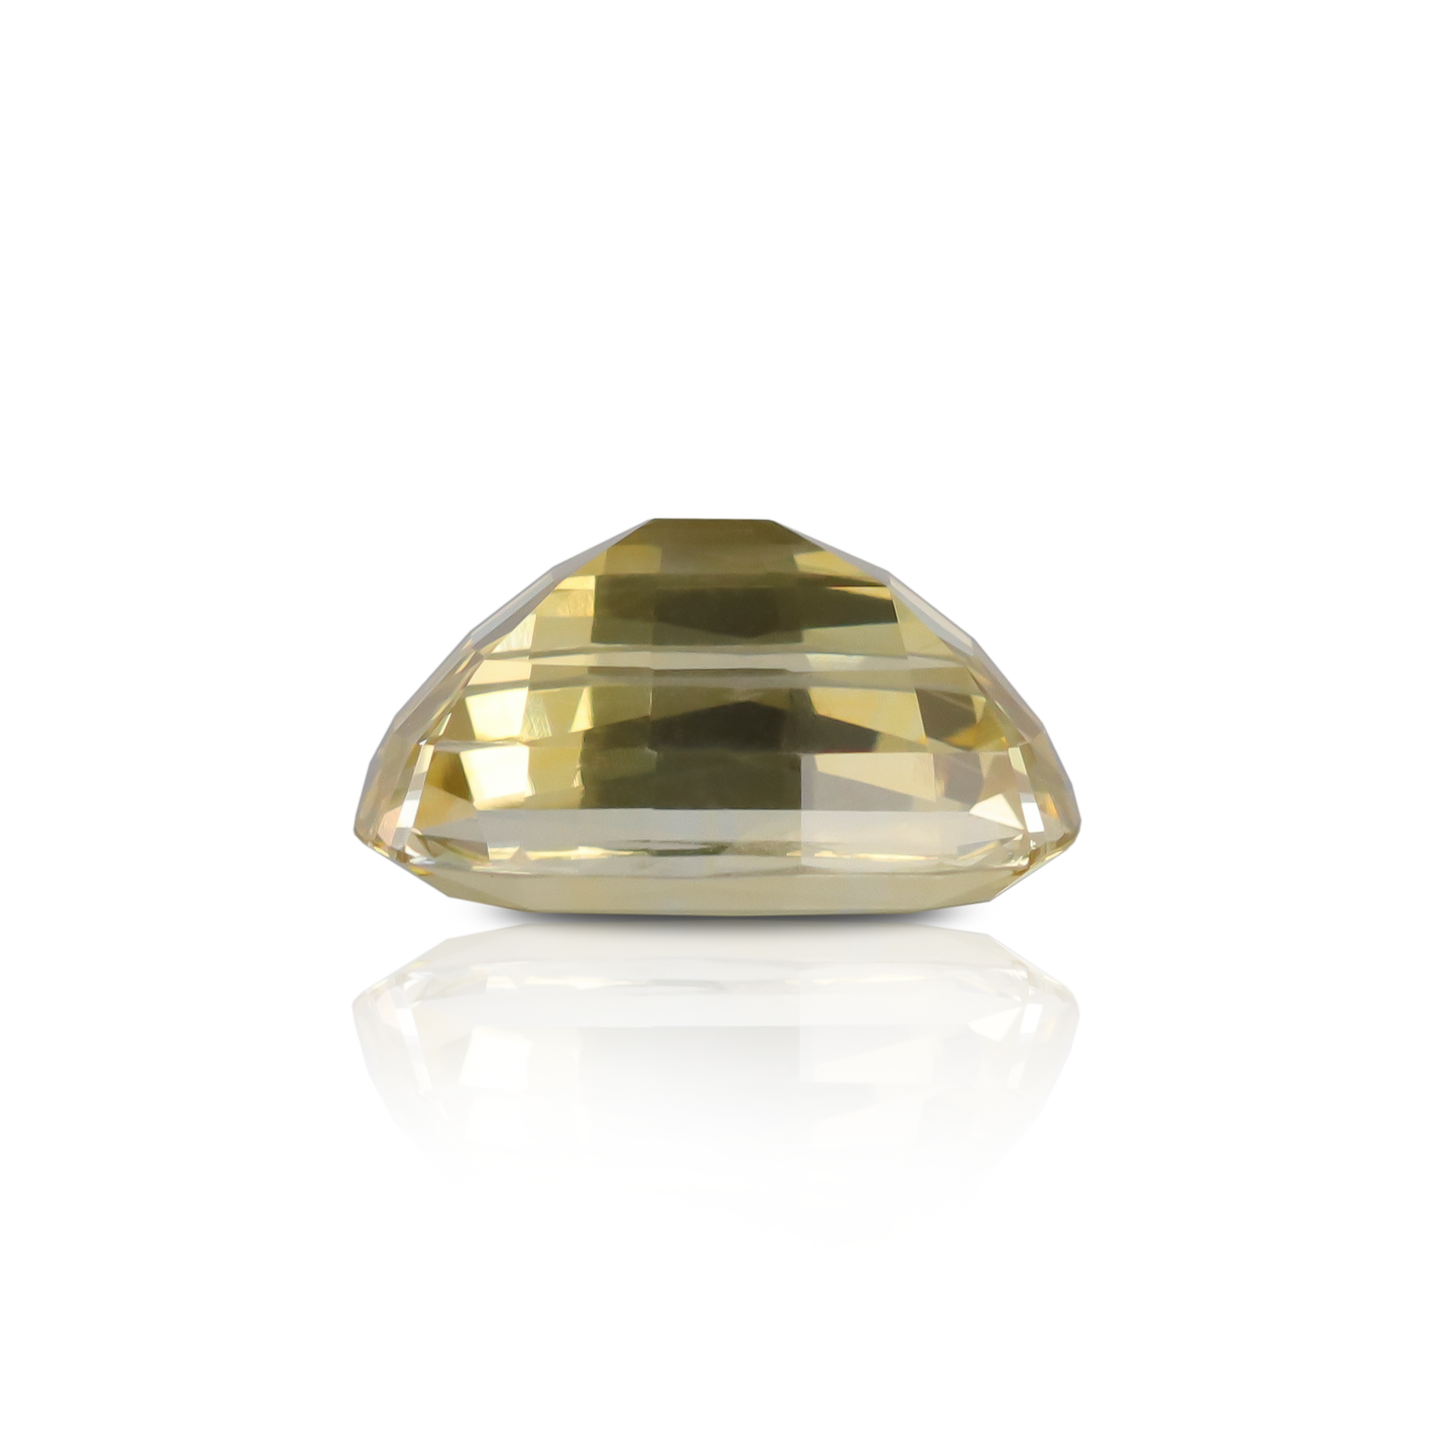 Natural Yellow Sapphire 12.66 Carats With GIA Report